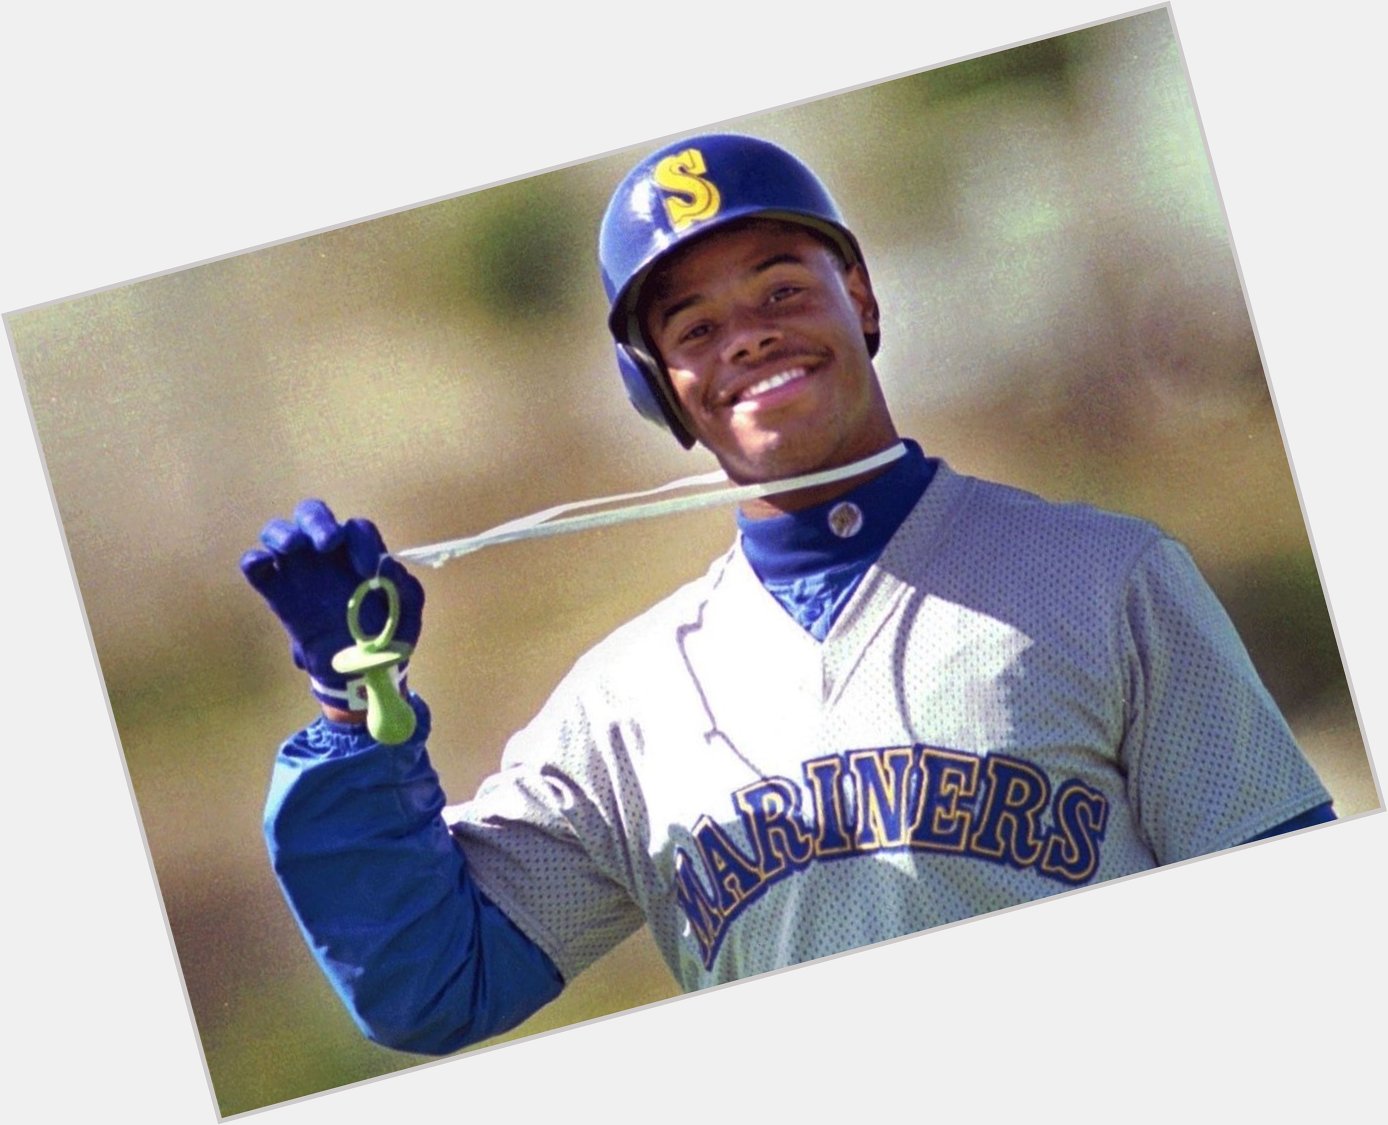 Happy birthday to The Kid, Ken Griffey Jr. Pay homage. 